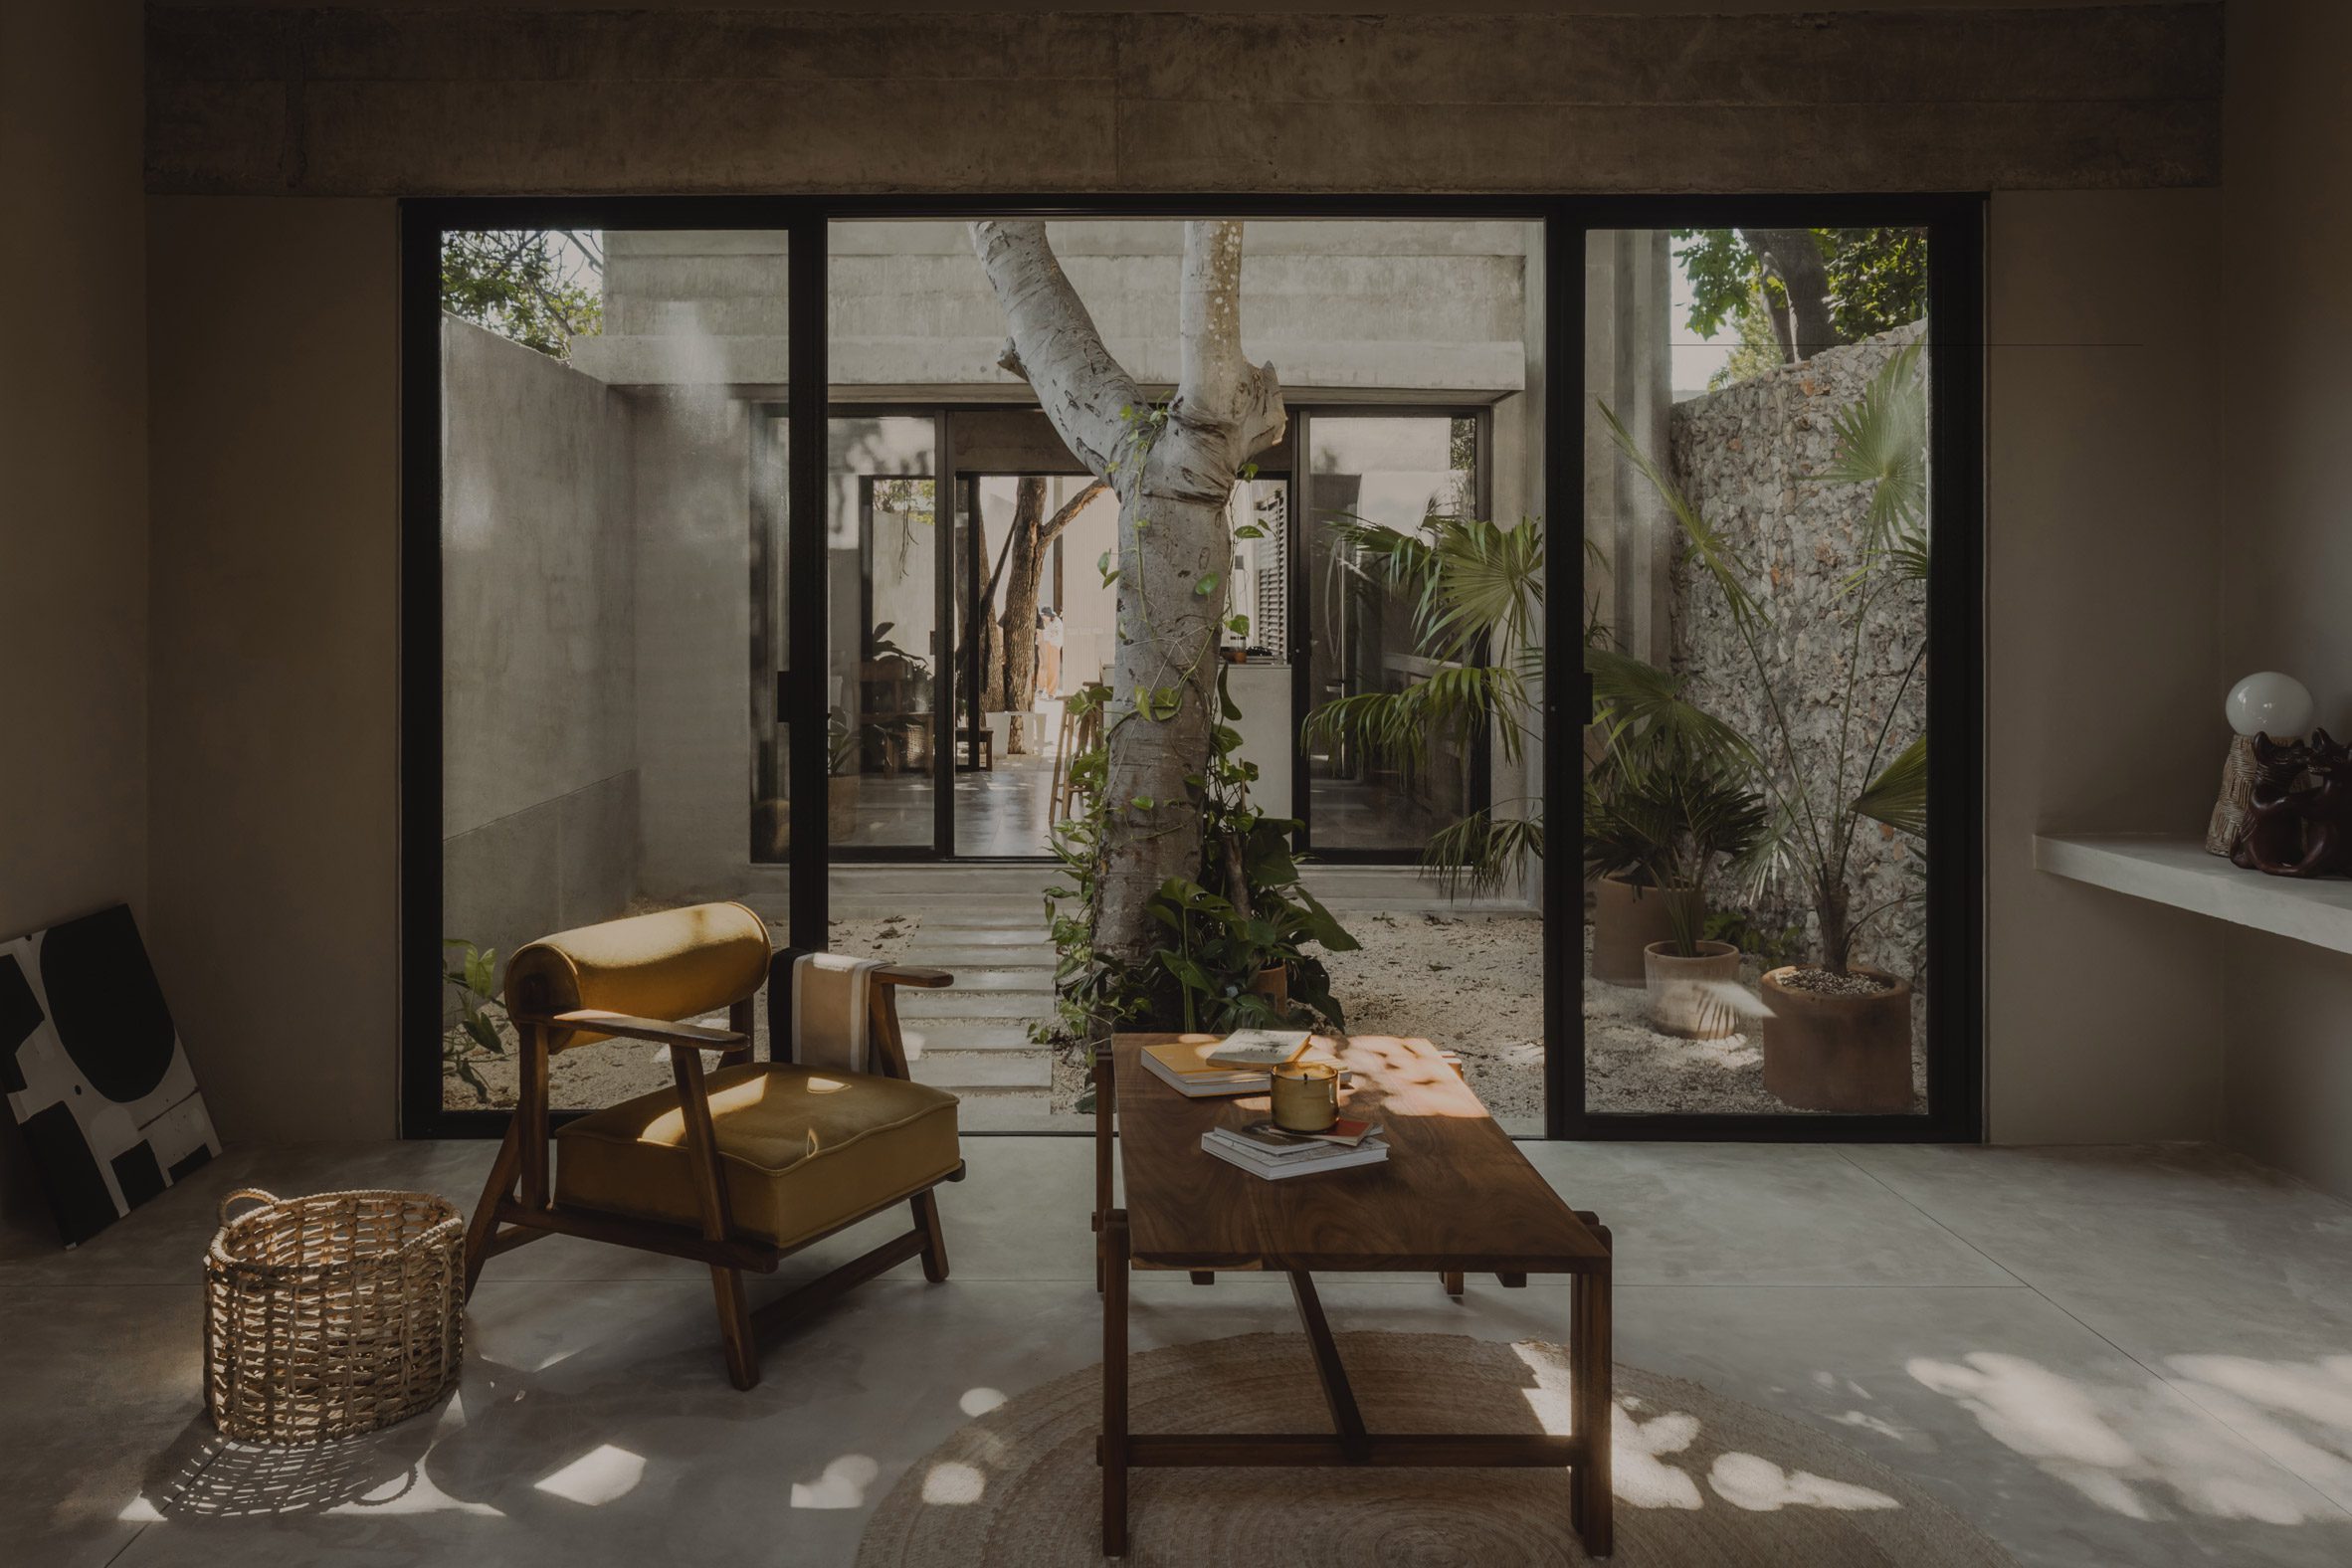 A living spaces with lounge chairs and sliding glass doors leading to a courtyard with a tree